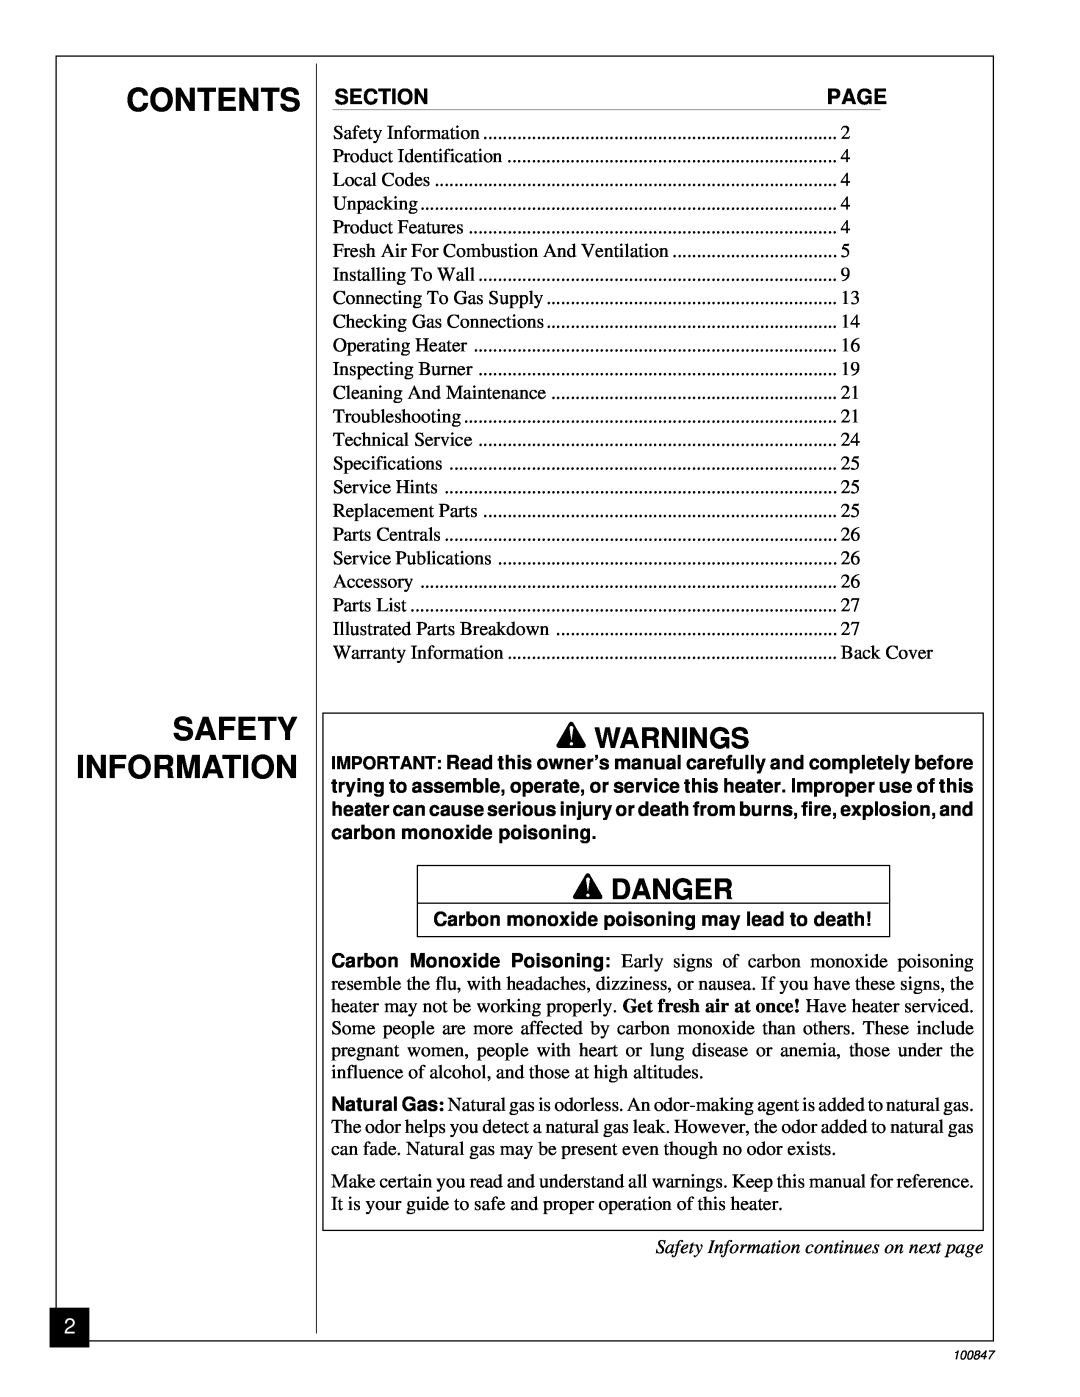 Desa CGN12A installation manual Contents Safety Information, Warnings, Danger, Safety Information continues on next page 